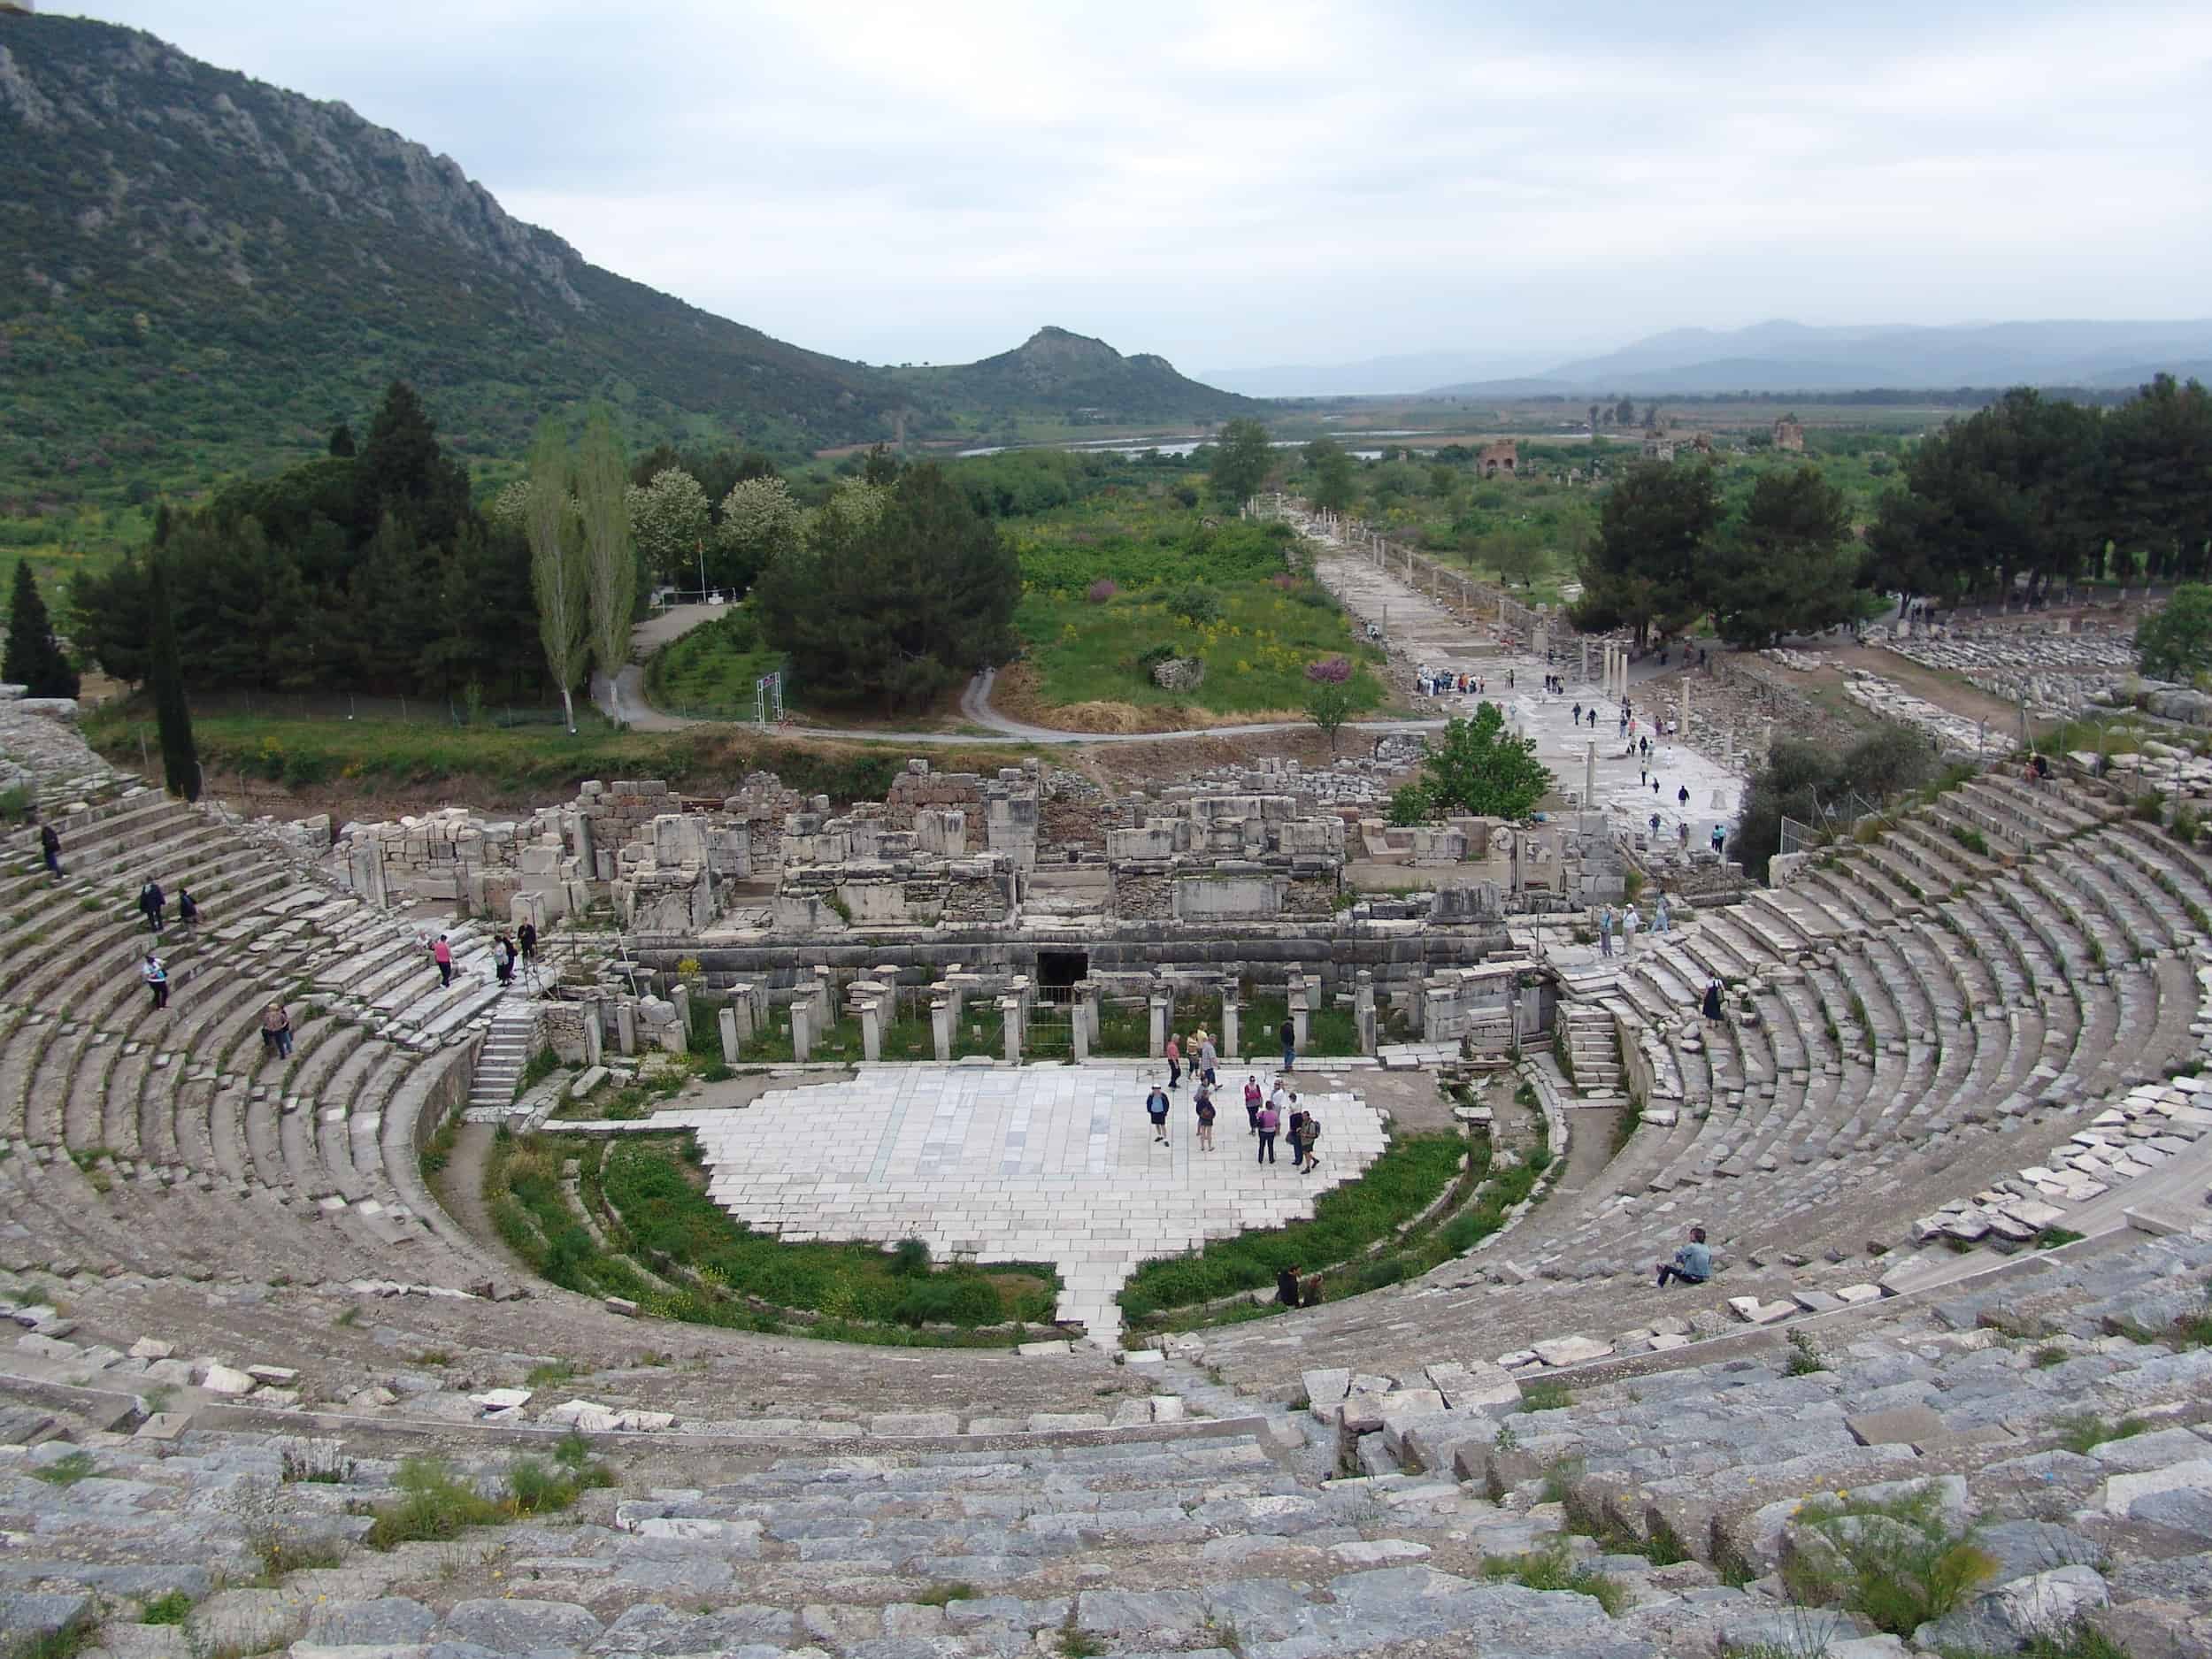 Looking towards the harbor at the Great Theatre of Ephesus